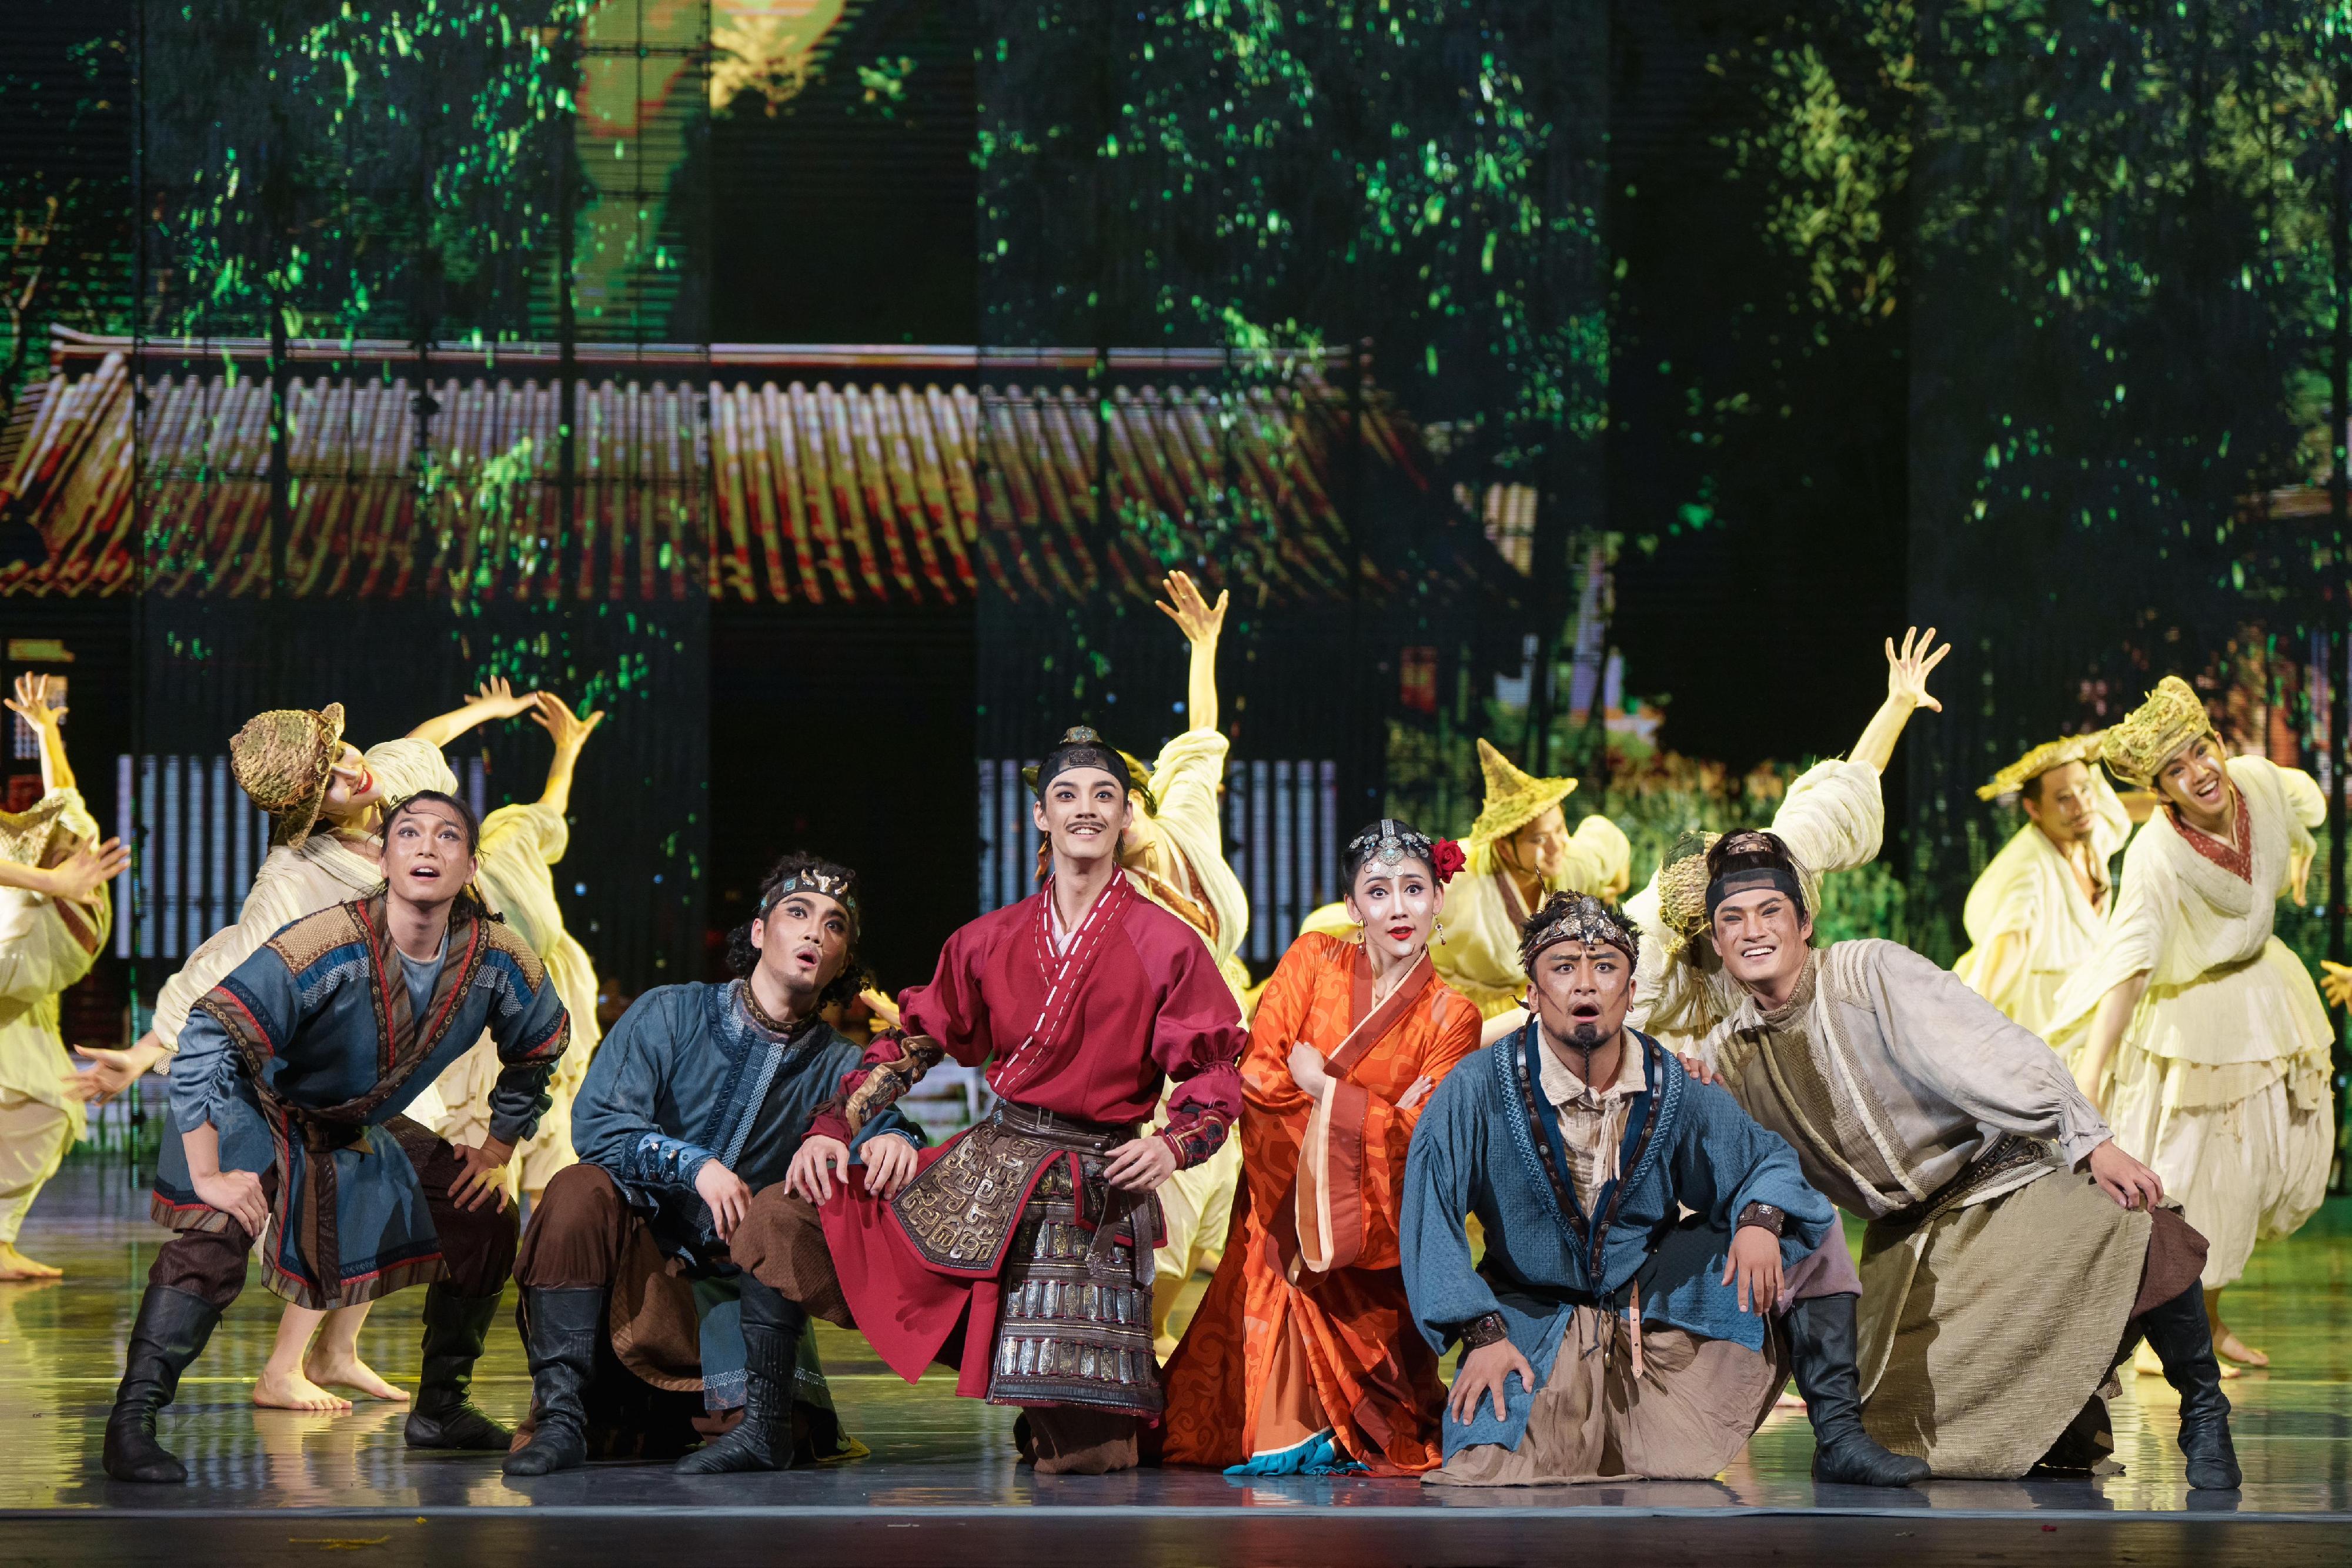 The opening programme of the inaugural Chinese Culture Festival, dance drama "Five Stars Rising in the East" by the Beijing Dance Drama and Opera, will be staged in Hong Kong in June. Photo shows a scene from "Five Stars Rising in the East".